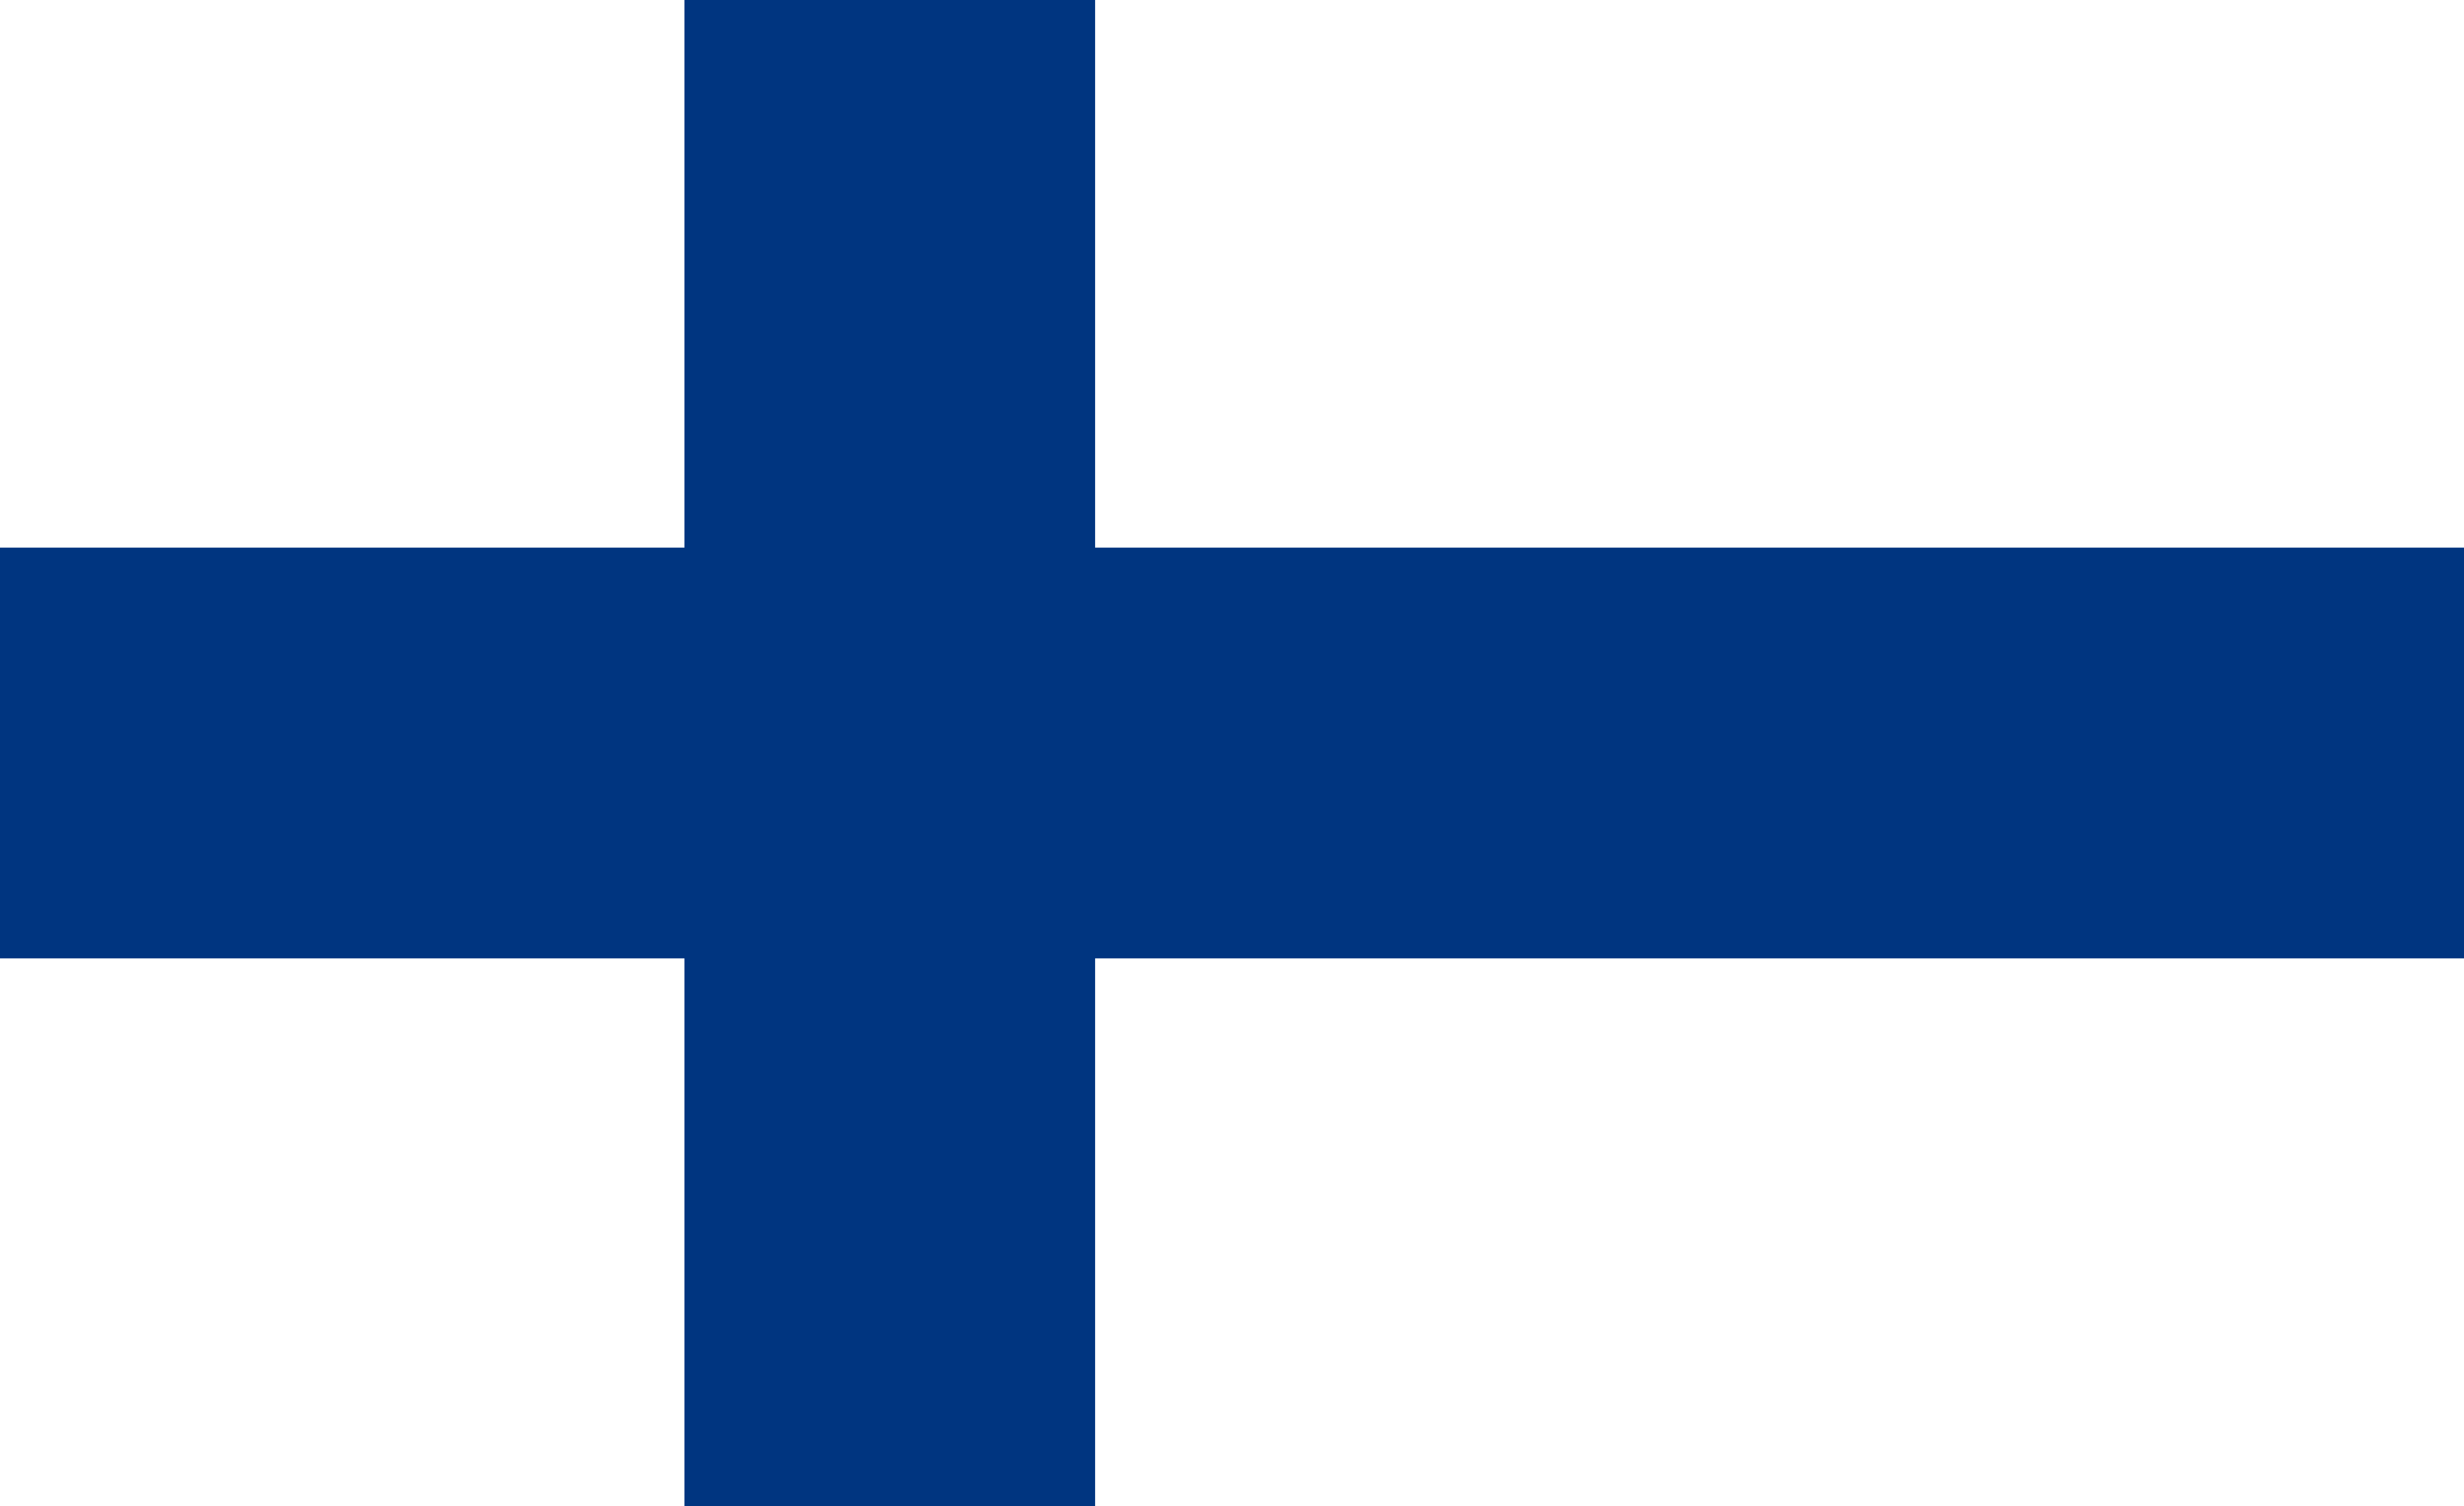 Finland Flag Image - Free Download